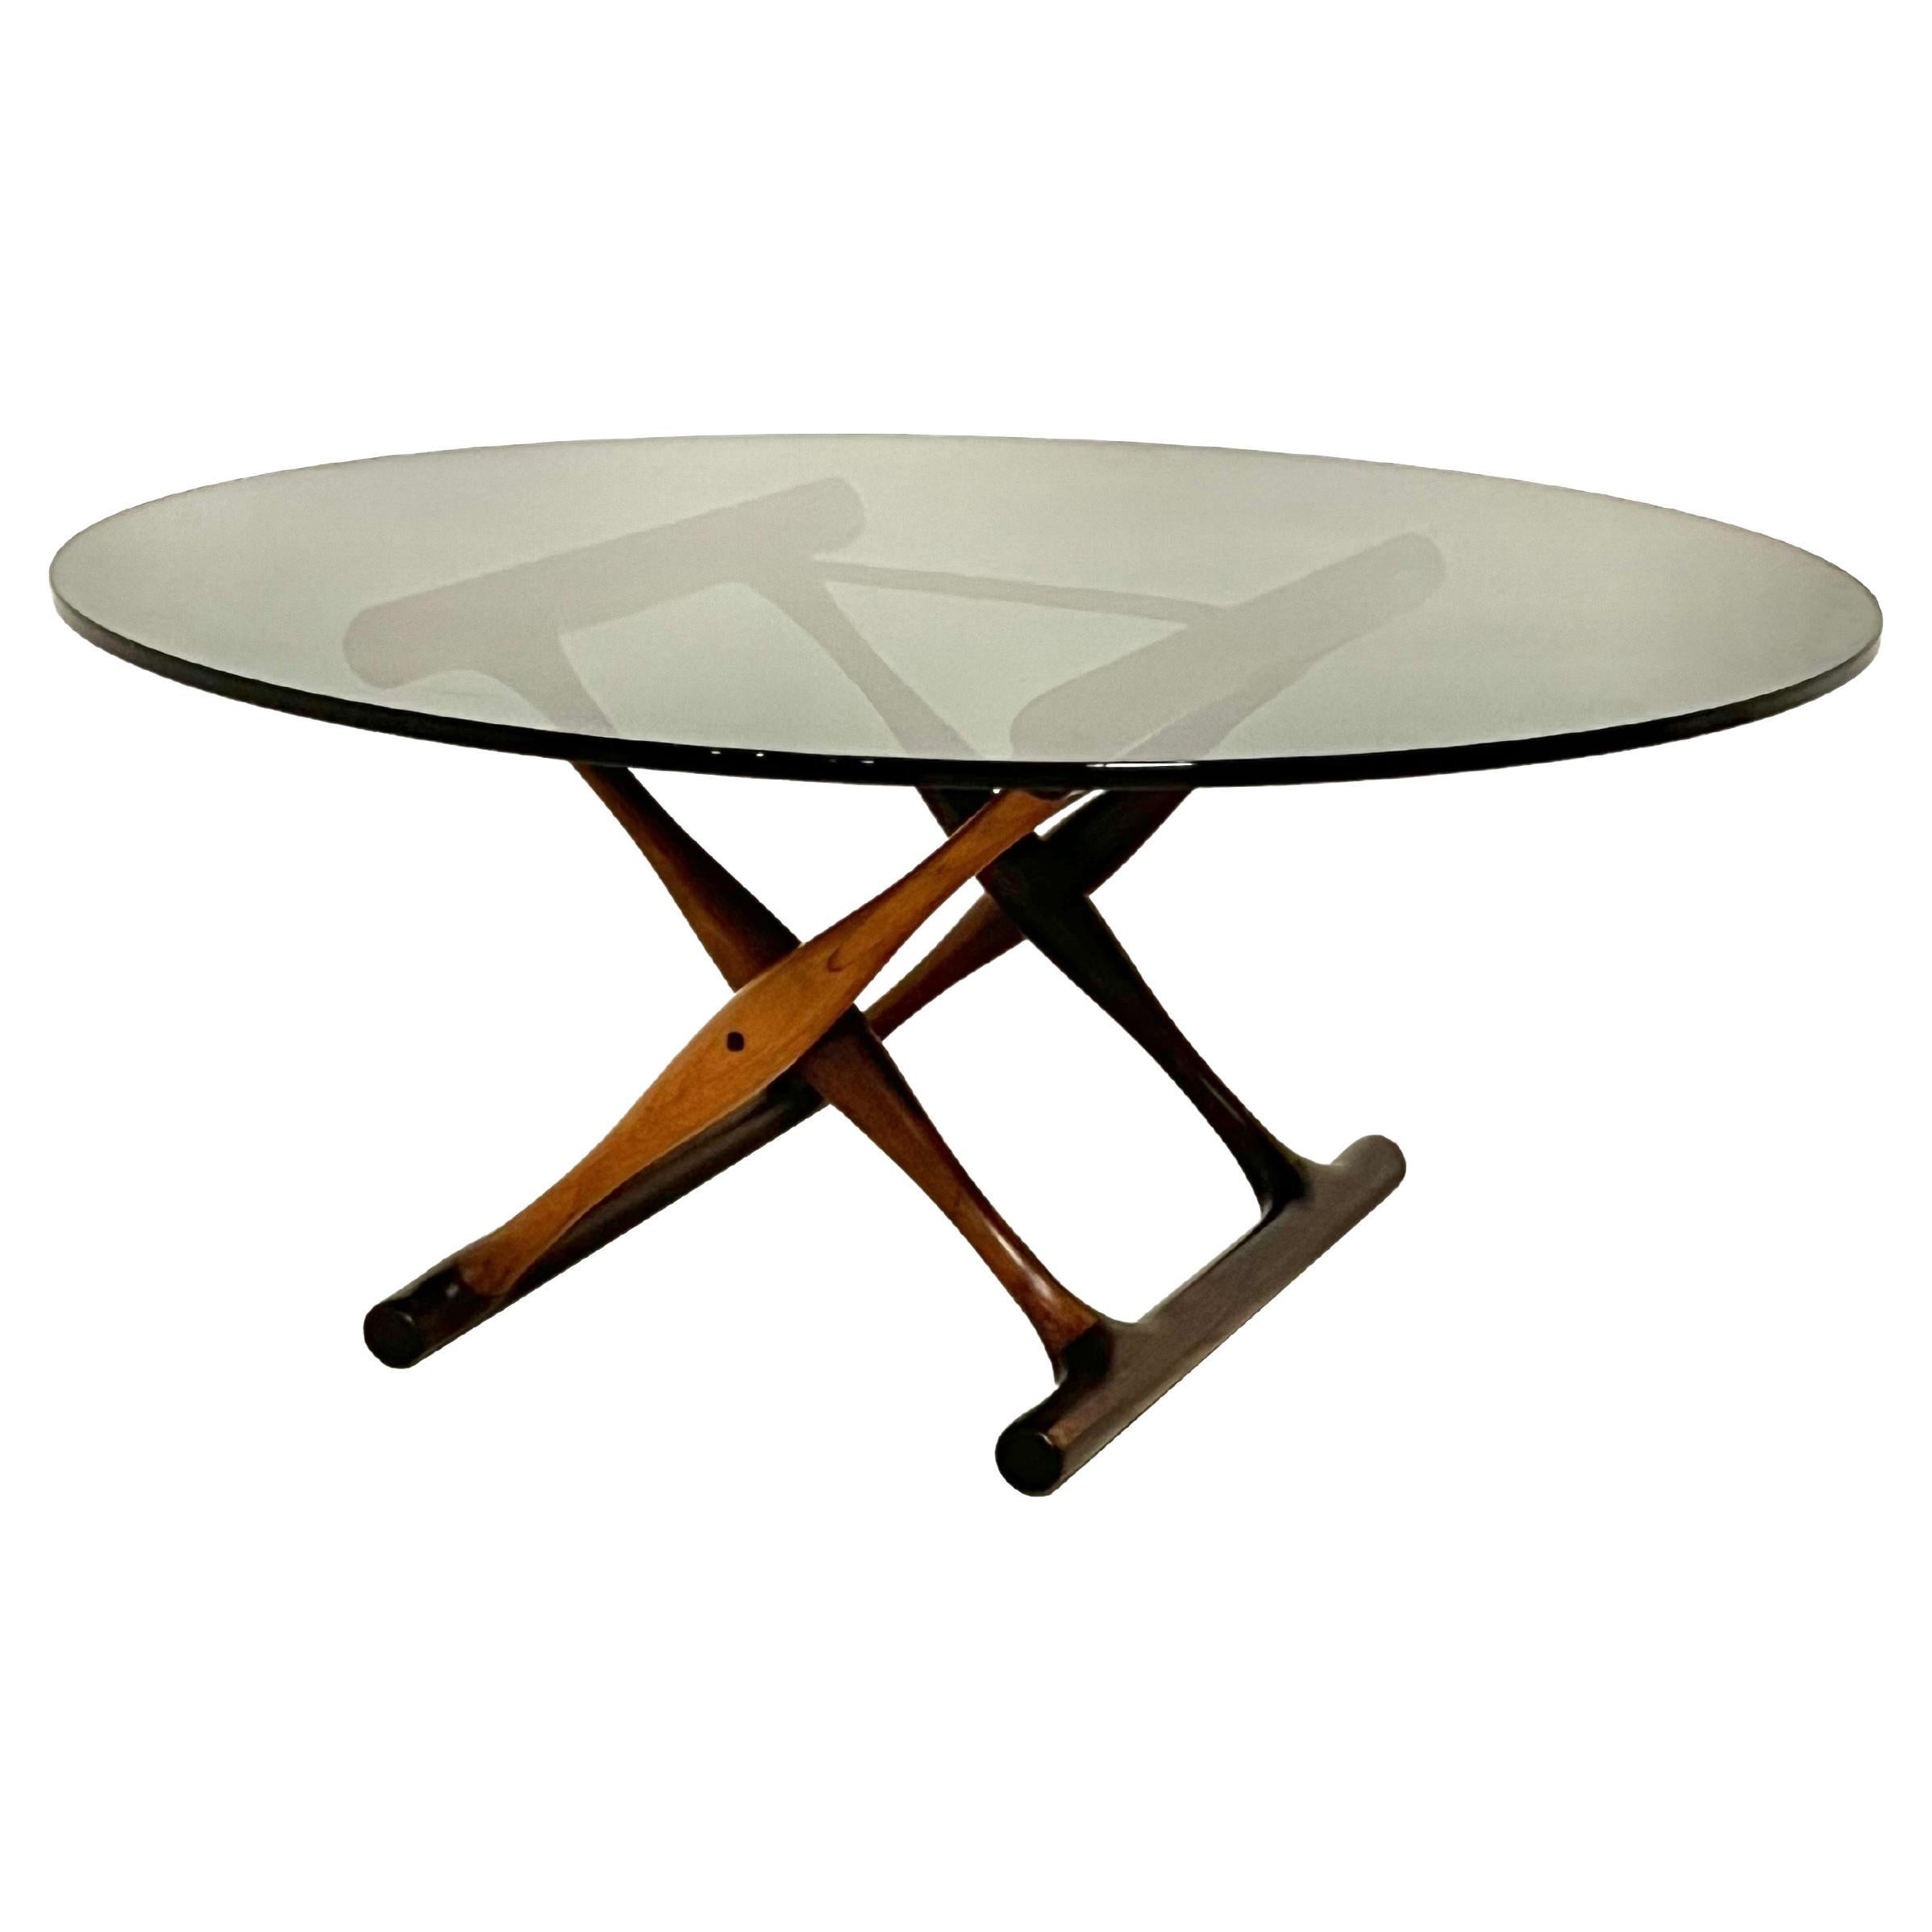 Poul Hundevad, Very Rare “Guldhoj-Table” in Rosewood and Smoked Glass